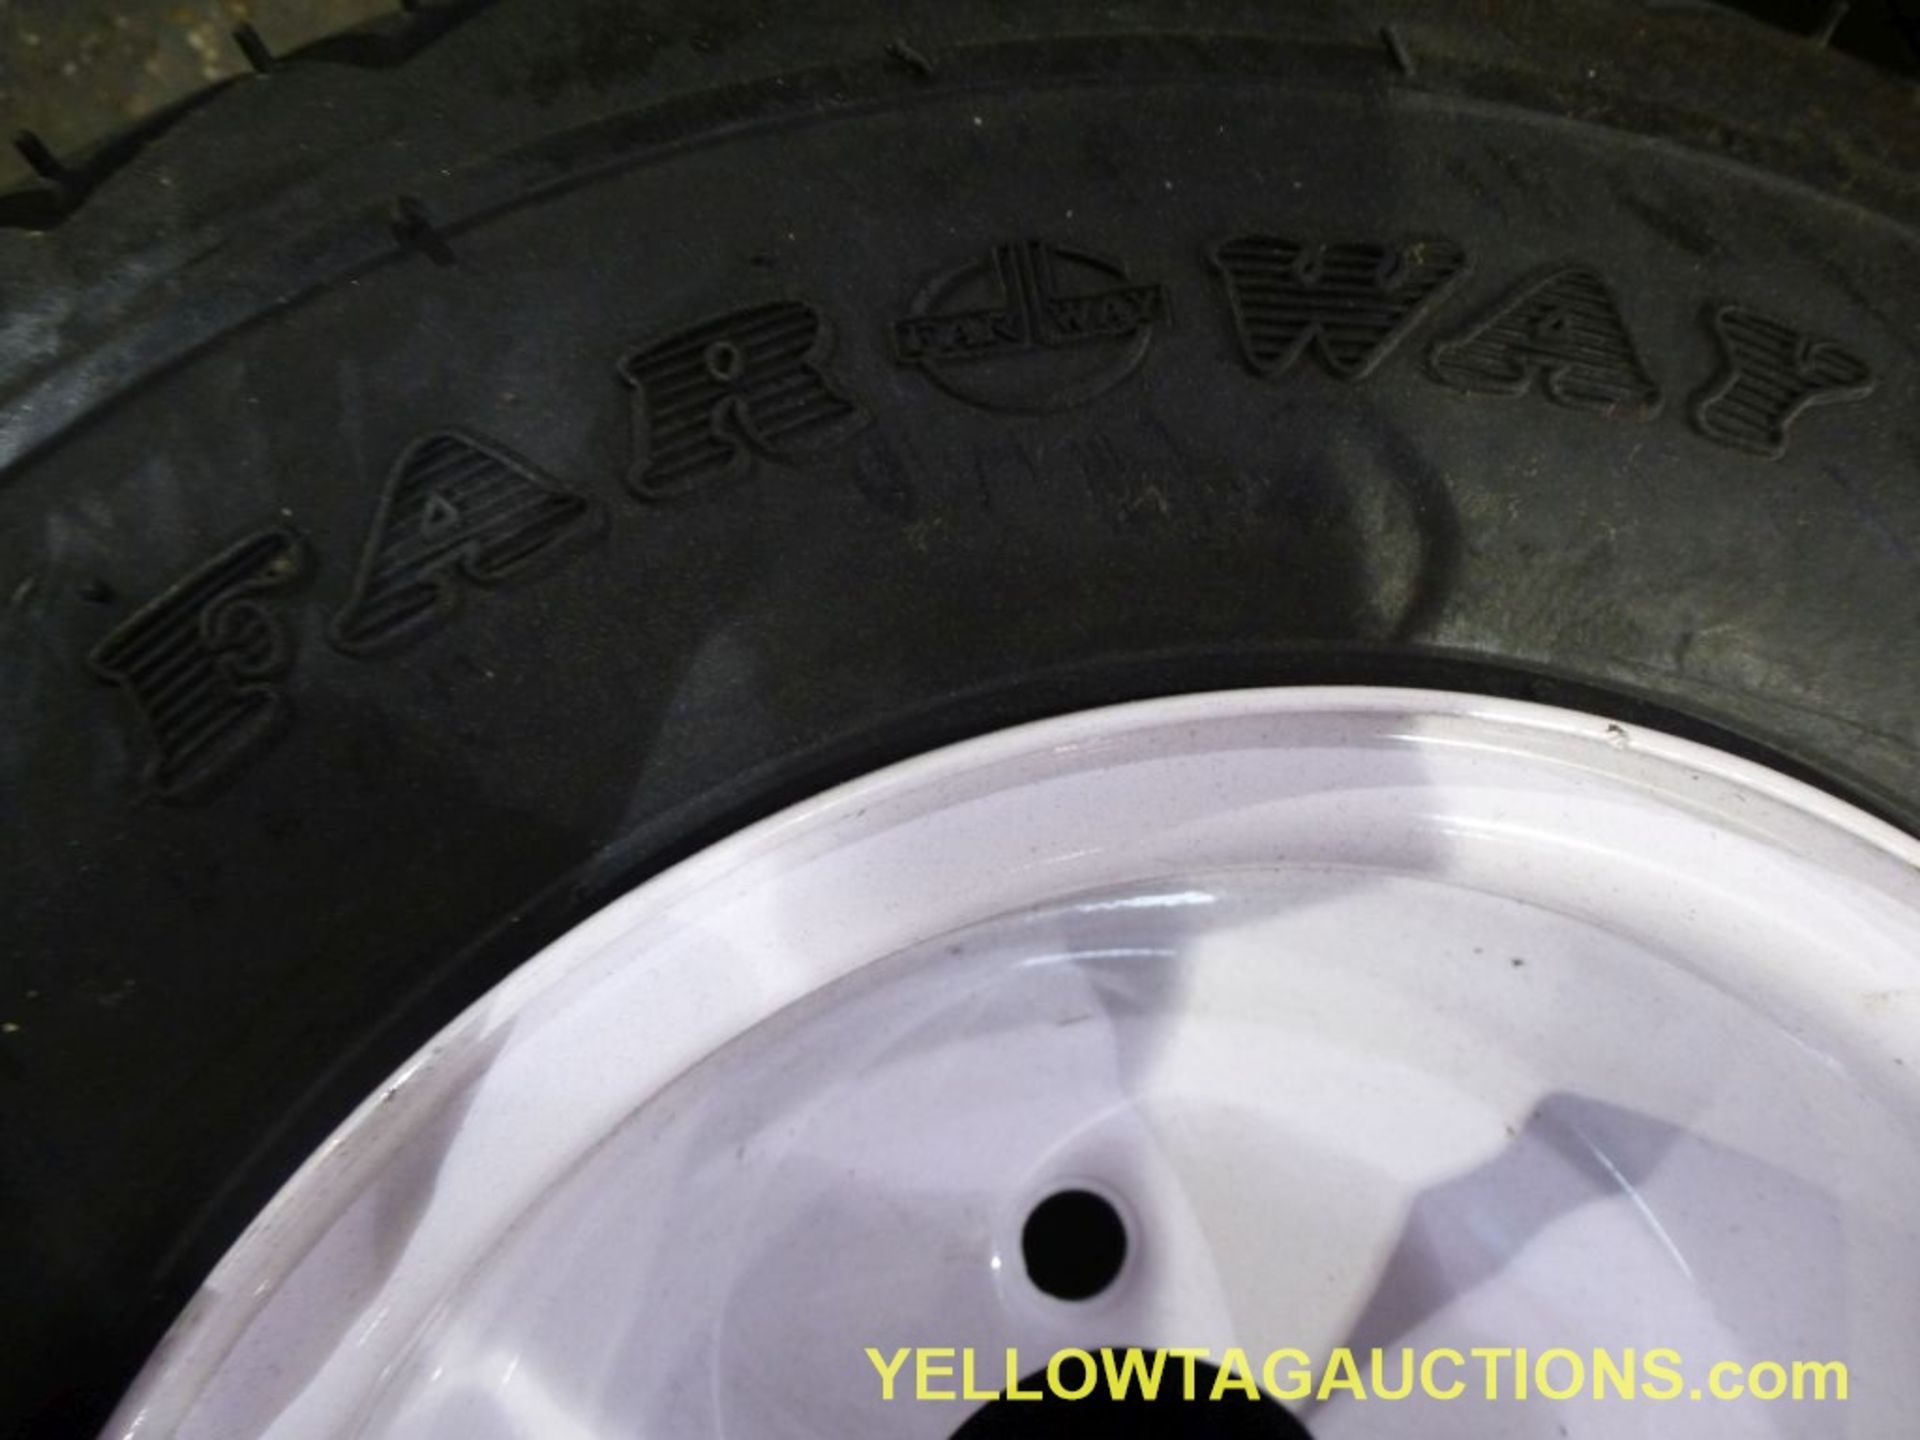 Lot of (12) FarWay 6-Ply Nylon Tires & Wheels|18 X 8.50 - 8NHS|Tag: 417 - Image 3 of 8